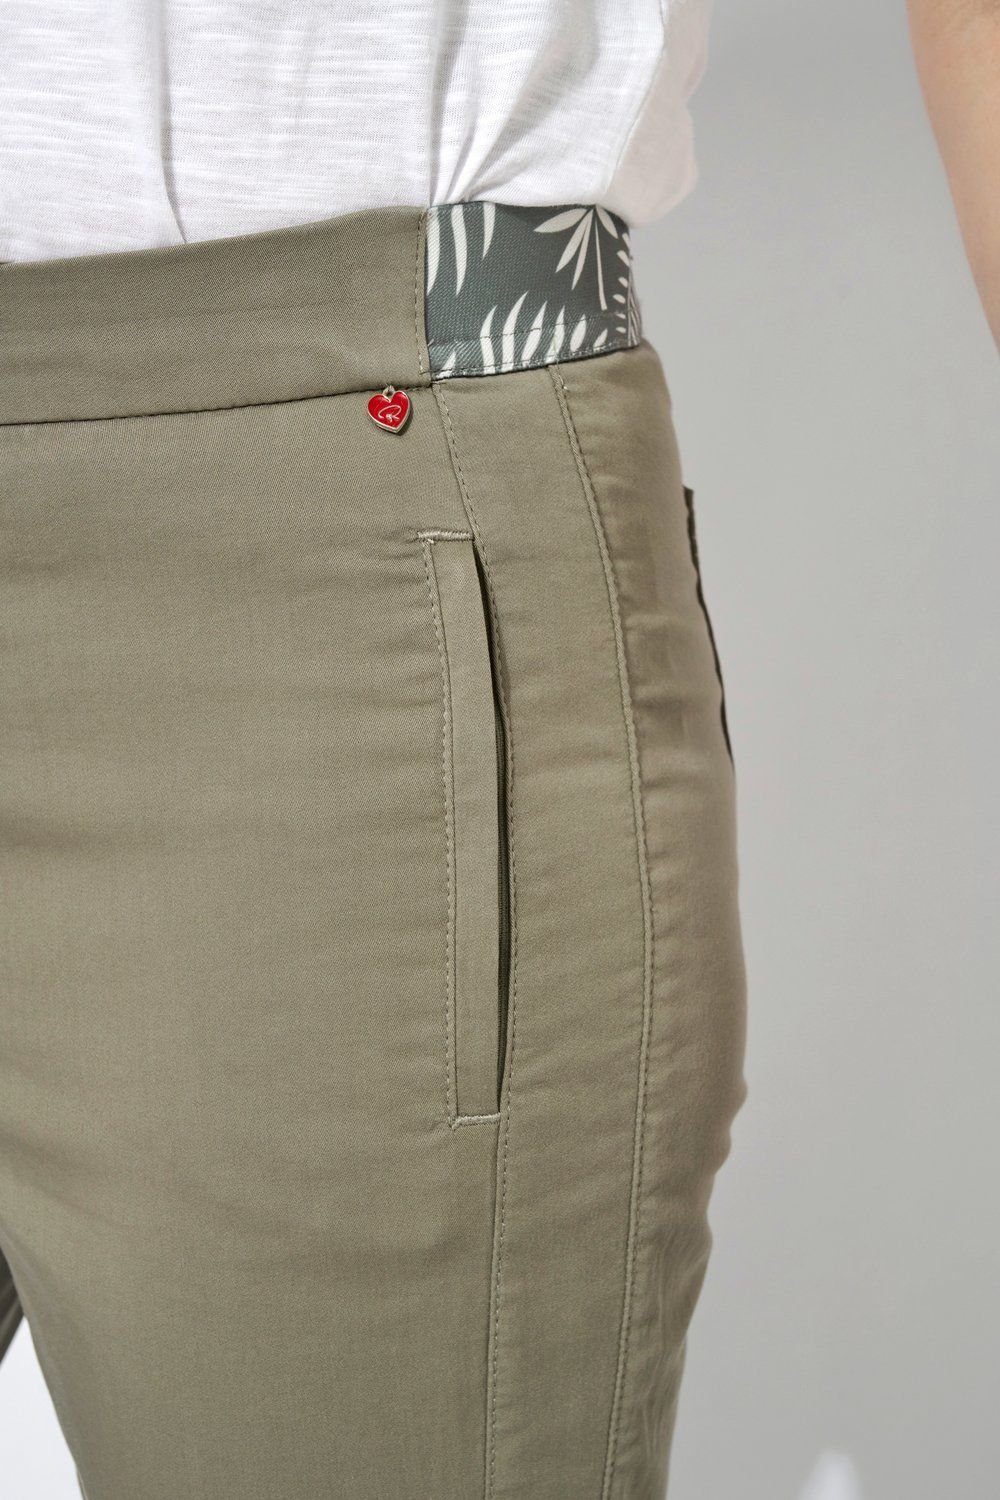 Chinos TONI khaki by Relaxed